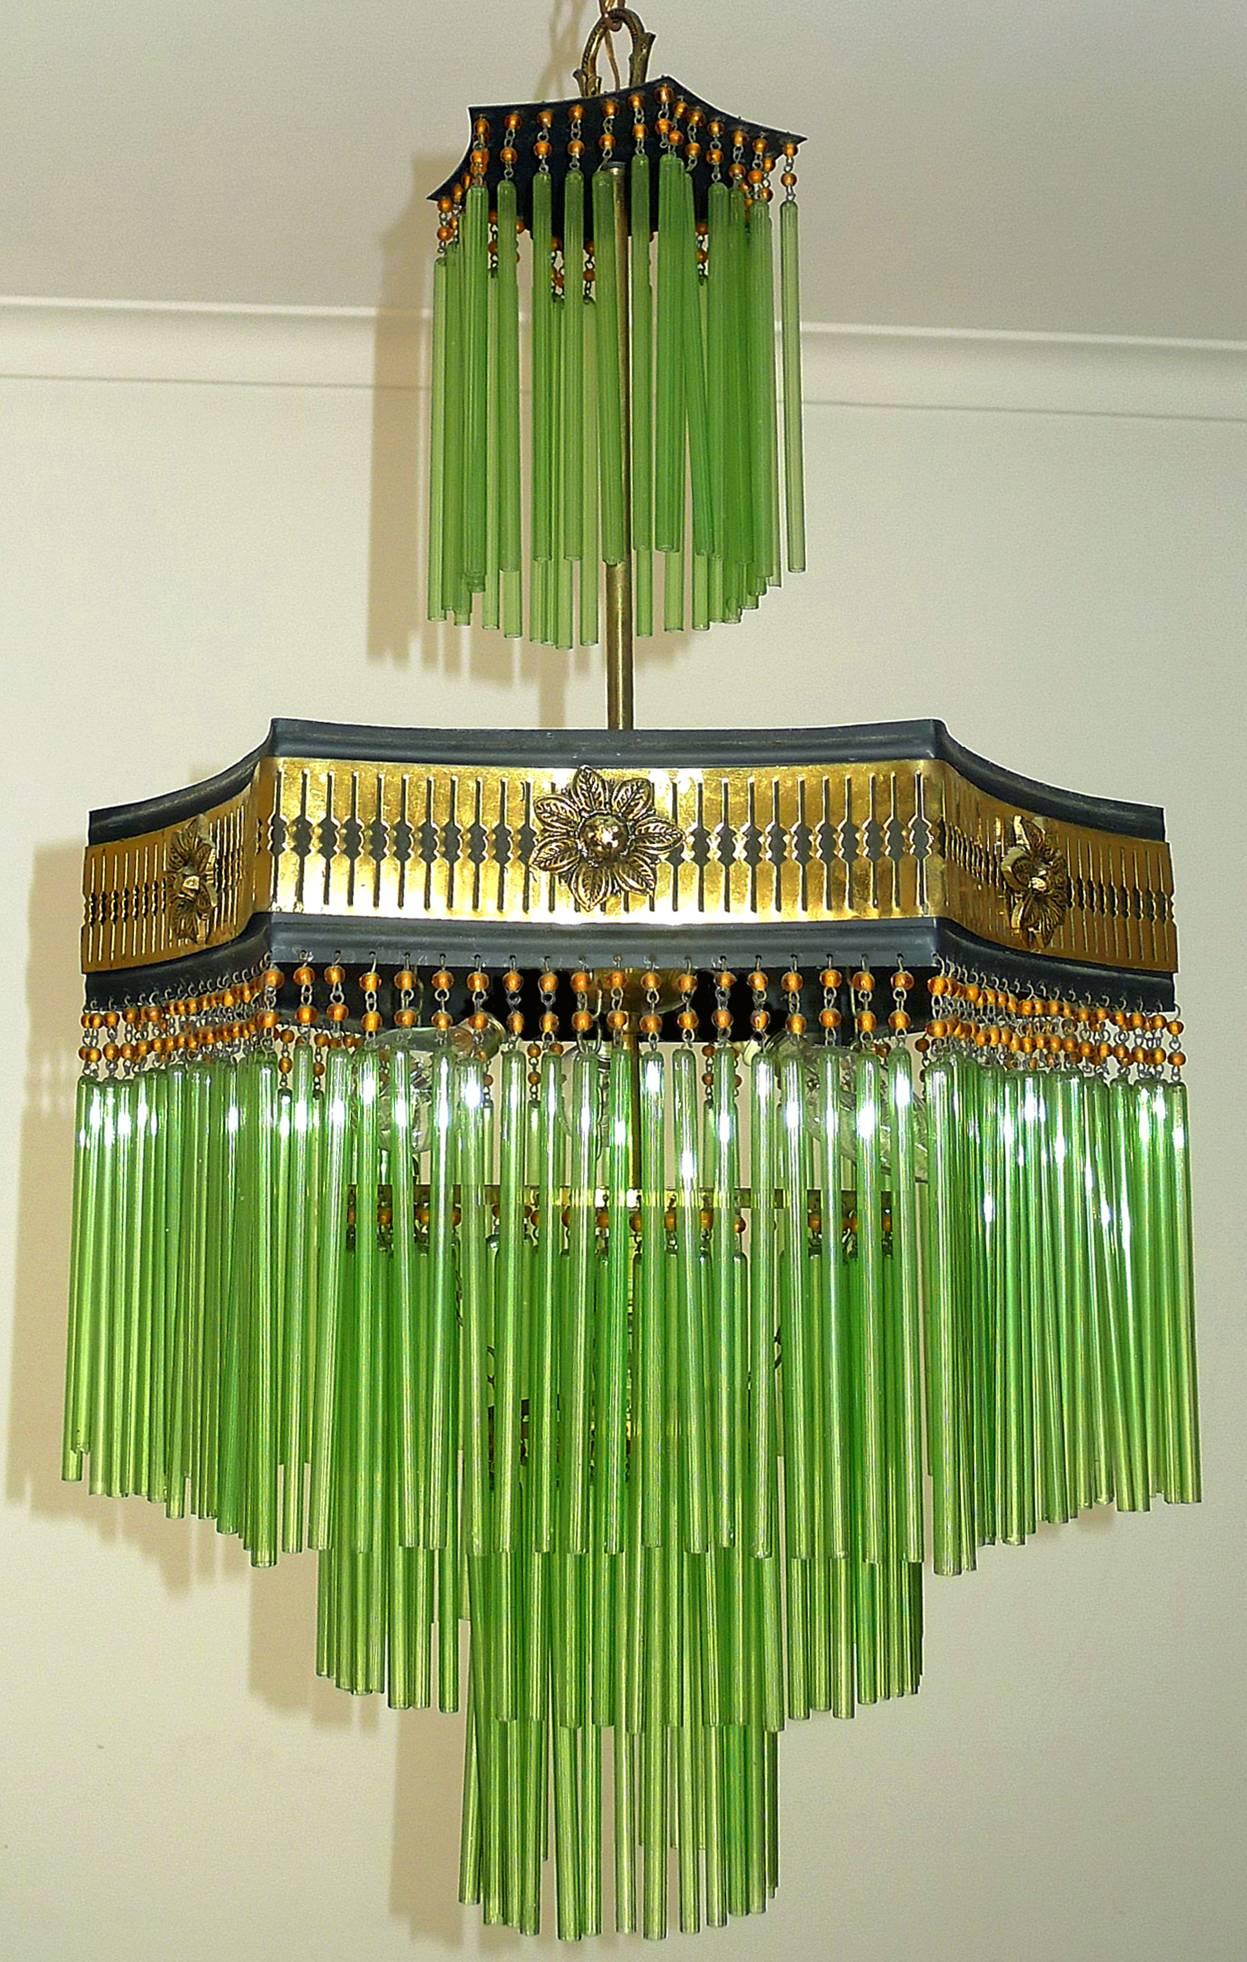 Fabulous French Art Deco & Art Nouveau gilt chandelier with amber glass beads and green glass straws
Measures: Diameter 16 in/ 40 cm
Height: 44 in (32 in + 12 in chain)/ 110 cm (80 cm + 30 cm chain)
Weight: 5 lb/ 4 Kg
Four light bulbs E14/ Good